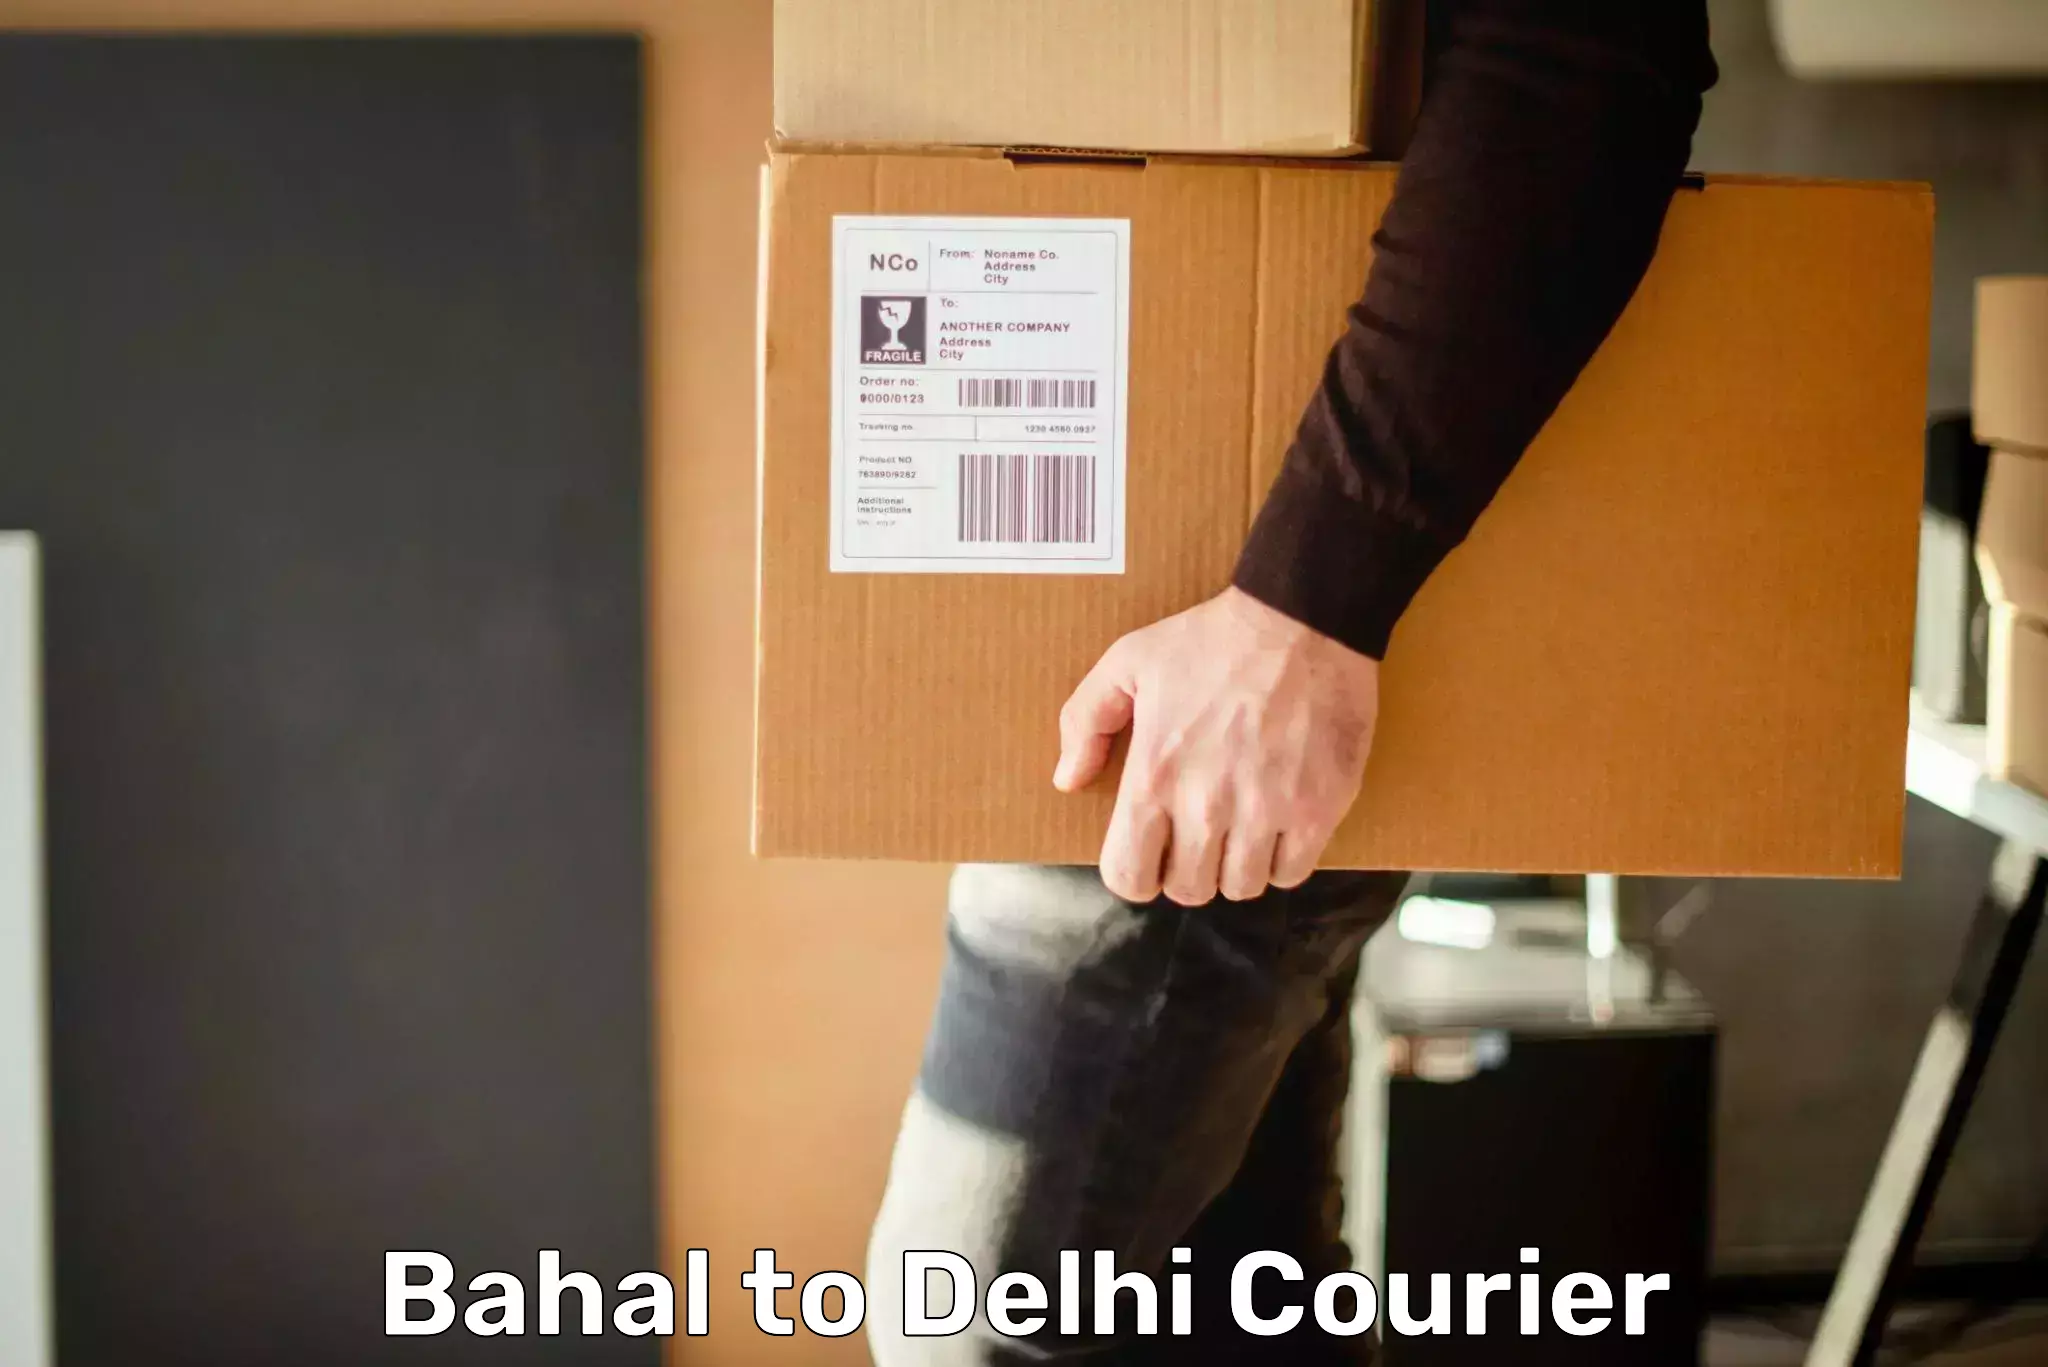 Global courier networks Bahal to Delhi